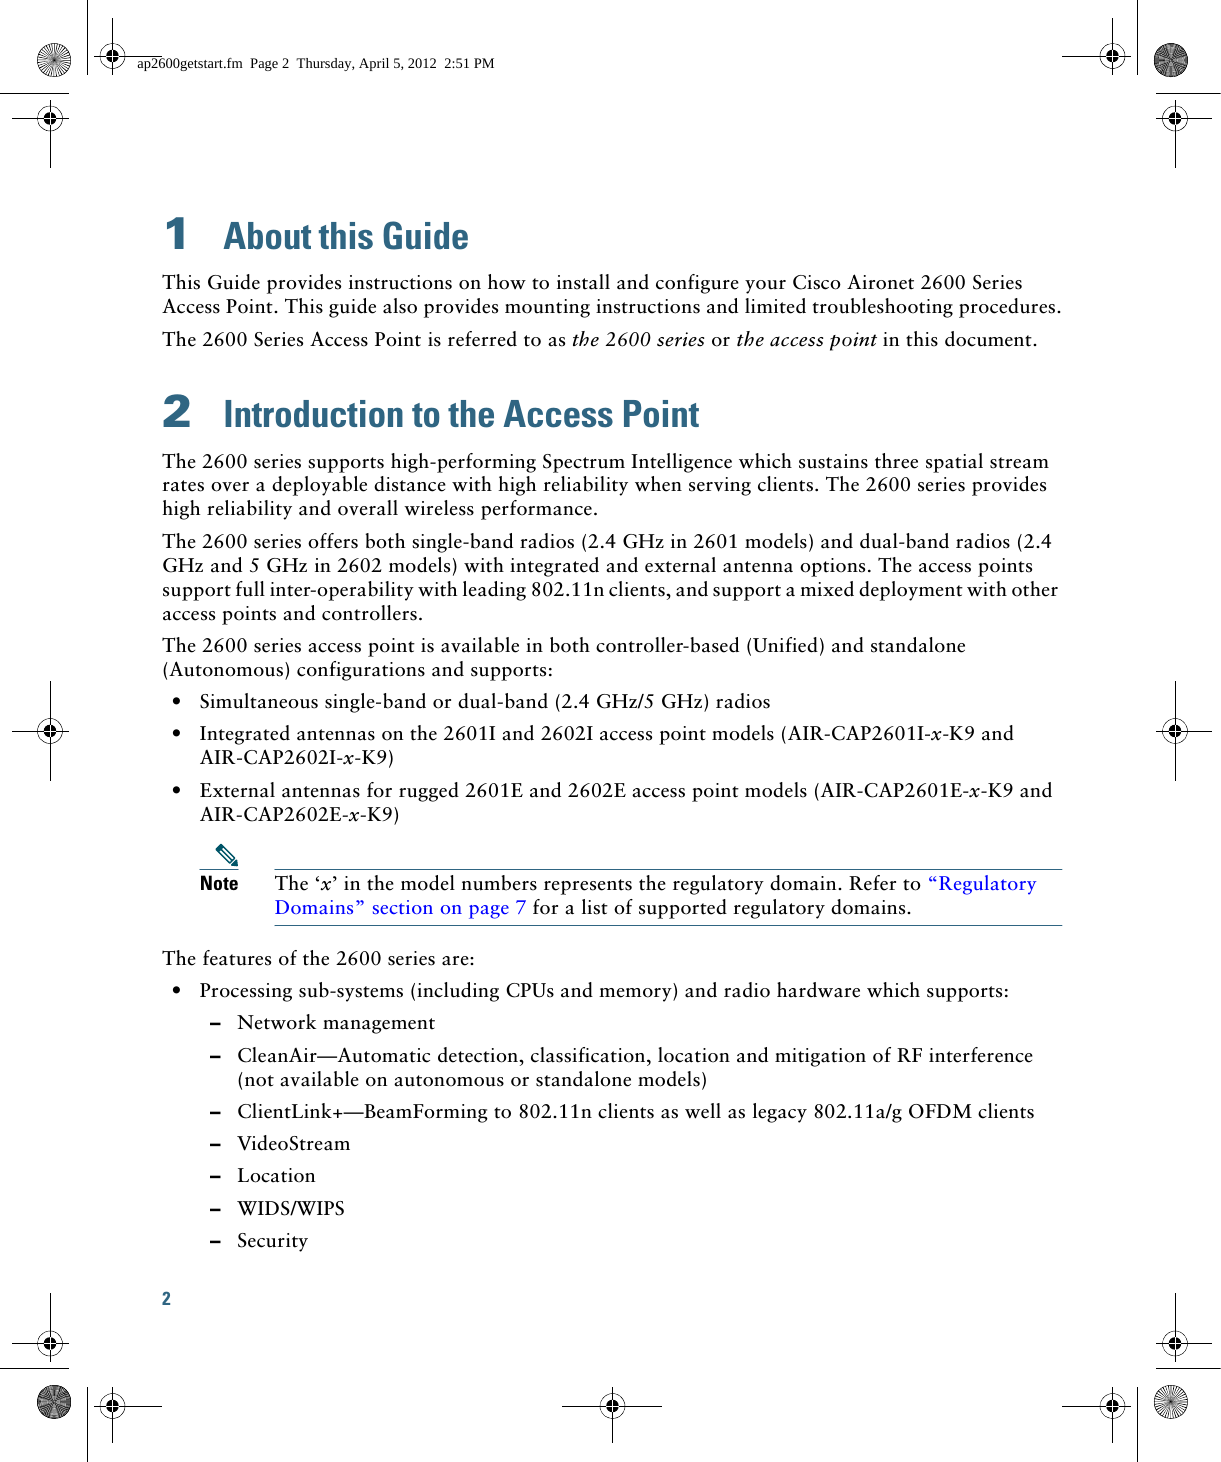 2 1  About this GuideThis Guide provides instructions on how to install and configure your Cisco Aironet 2600 Series Access Point. This guide also provides mounting instructions and limited troubleshooting procedures.The 2600 Series Access Point is referred to as the 2600 series or the access point in this document.2  Introduction to the Access PointThe 2600 series supports high-performing Spectrum Intelligence which sustains three spatial stream rates over a deployable distance with high reliability when serving clients. The 2600 series provides high reliability and overall wireless performance.The 2600 series offers both single-band radios (2.4 GHz in 2601 models) and dual-band radios (2.4 GHz and 5 GHz in 2602 models) with integrated and external antenna options. The access points support full inter-operability with leading 802.11n clients, and support a mixed deployment with other access points and controllers.The 2600 series access point is available in both controller-based (Unified) and standalone (Autonomous) configurations and supports:  • Simultaneous single-band or dual-band (2.4 GHz/5 GHz) radios  • Integrated antennas on the 2601I and 2602I access point models (AIR-CAP2601I-x-K9 and AIR-CAP2602I-x-K9)  • External antennas for rugged 2601E and 2602E access point models (AIR-CAP2601E-x-K9 and AIR-CAP2602E-x-K9)Note The ‘x’ in the model numbers represents the regulatory domain. Refer to “Regulatory Domains” section on page 7 for a list of supported regulatory domains.The features of the 2600 series are:  • Processing sub-systems (including CPUs and memory) and radio hardware which supports:  –Network management  –CleanAir—Automatic detection, classification, location and mitigation of RF interference (not available on autonomous or standalone models)  –ClientLink+—BeamForming to 802.11n clients as well as legacy 802.11a/g OFDM clients   –VideoStream  –Location  –WIDS/WIPS  –Securityap2600getstart.fm  Page 2  Thursday, April 5, 2012  2:51 PM